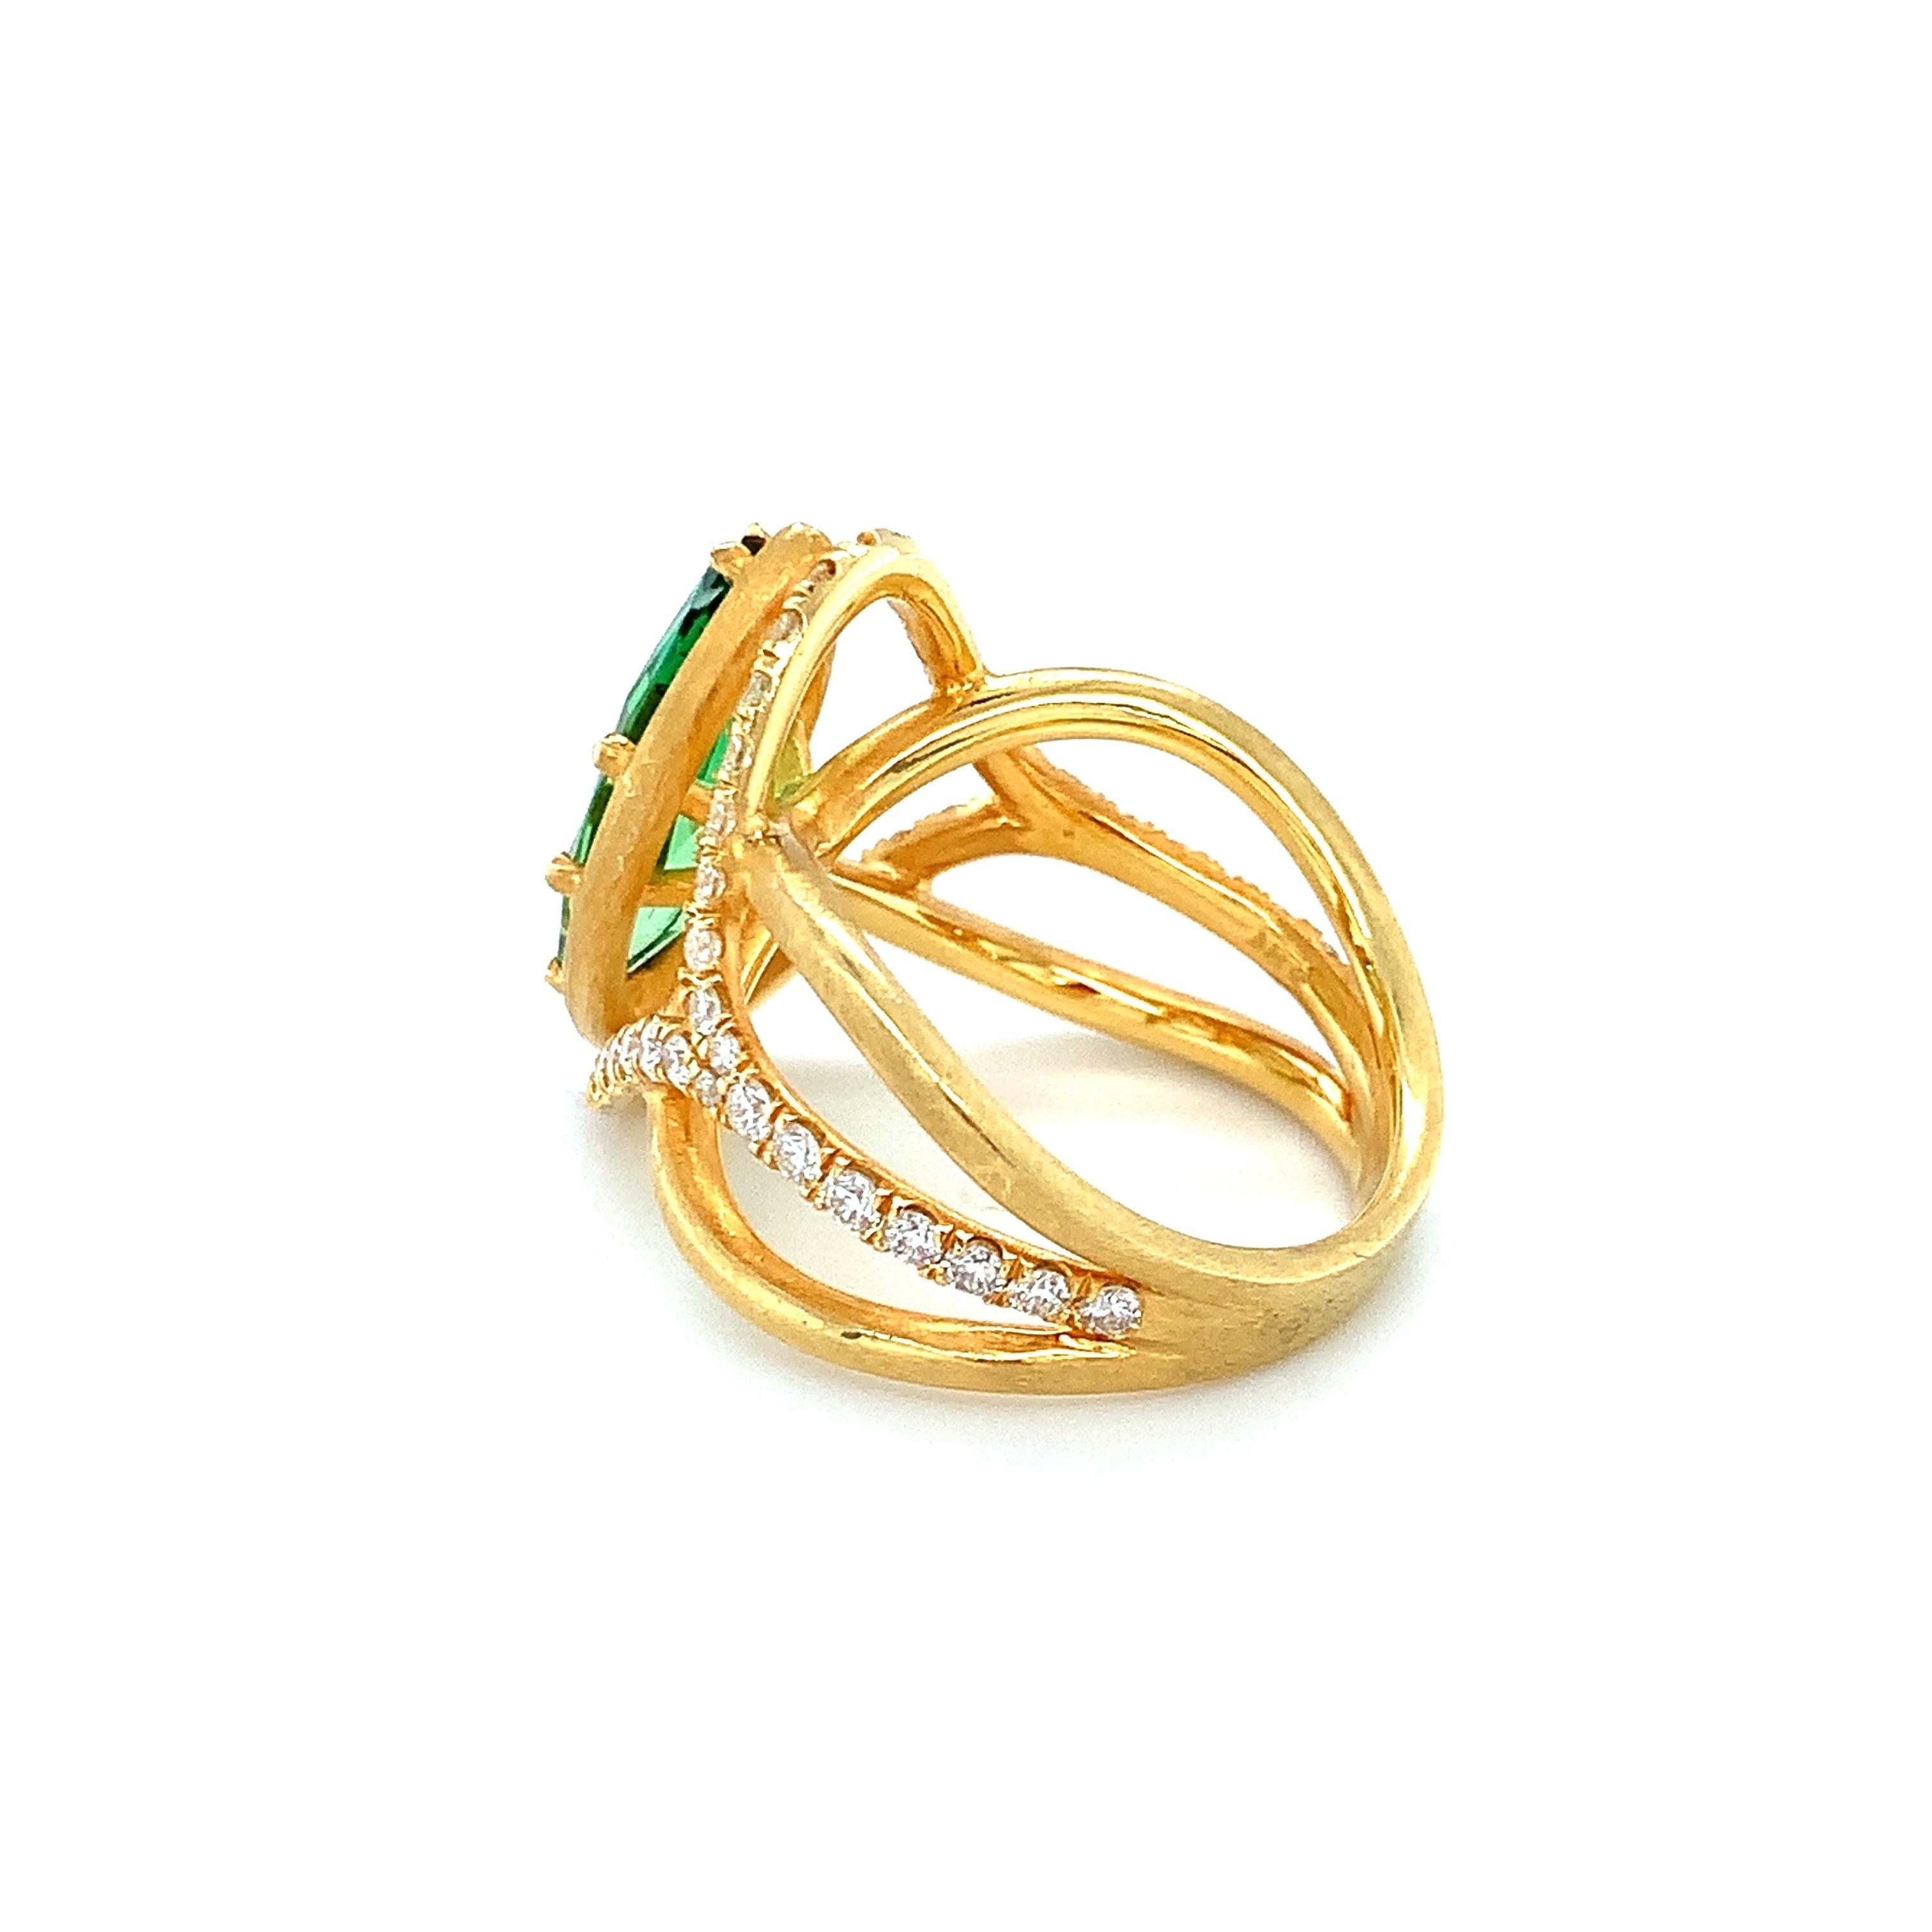 Women's Tsavorite Garnet and Diamond Cocktail Ring in Yellow Gold, 2.95 Carats For Sale